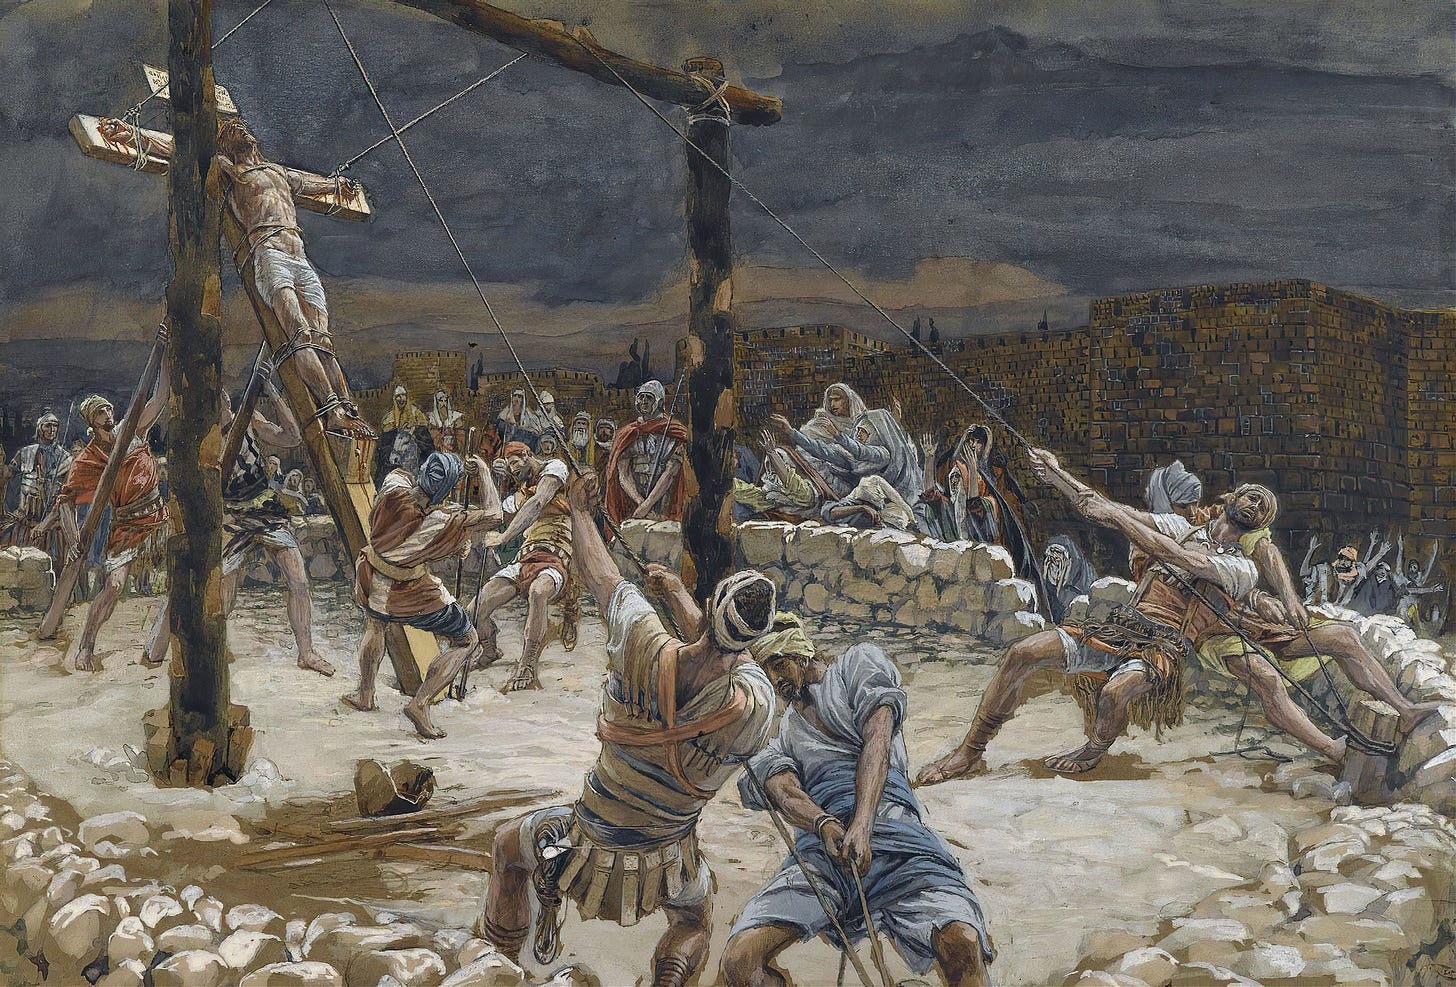 The Raising of the Cross (1886-1894) by James Tissot